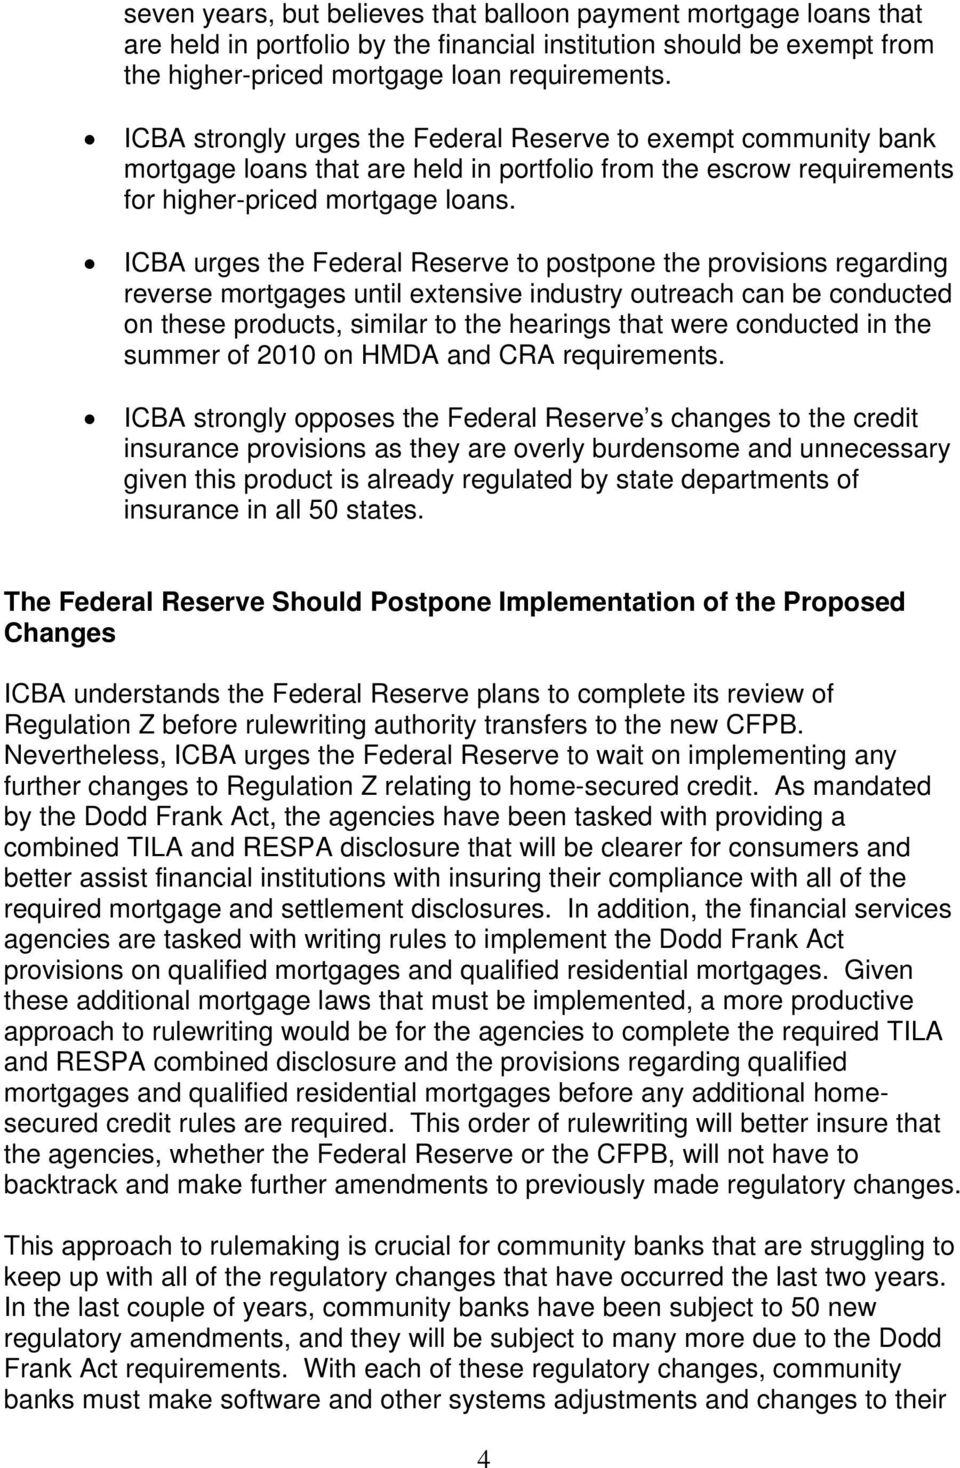 ICBA urges the Federal Reserve to postpone the provisions regarding reverse mortgages until extensive industry outreach can be conducted on these products, similar to the hearings that were conducted